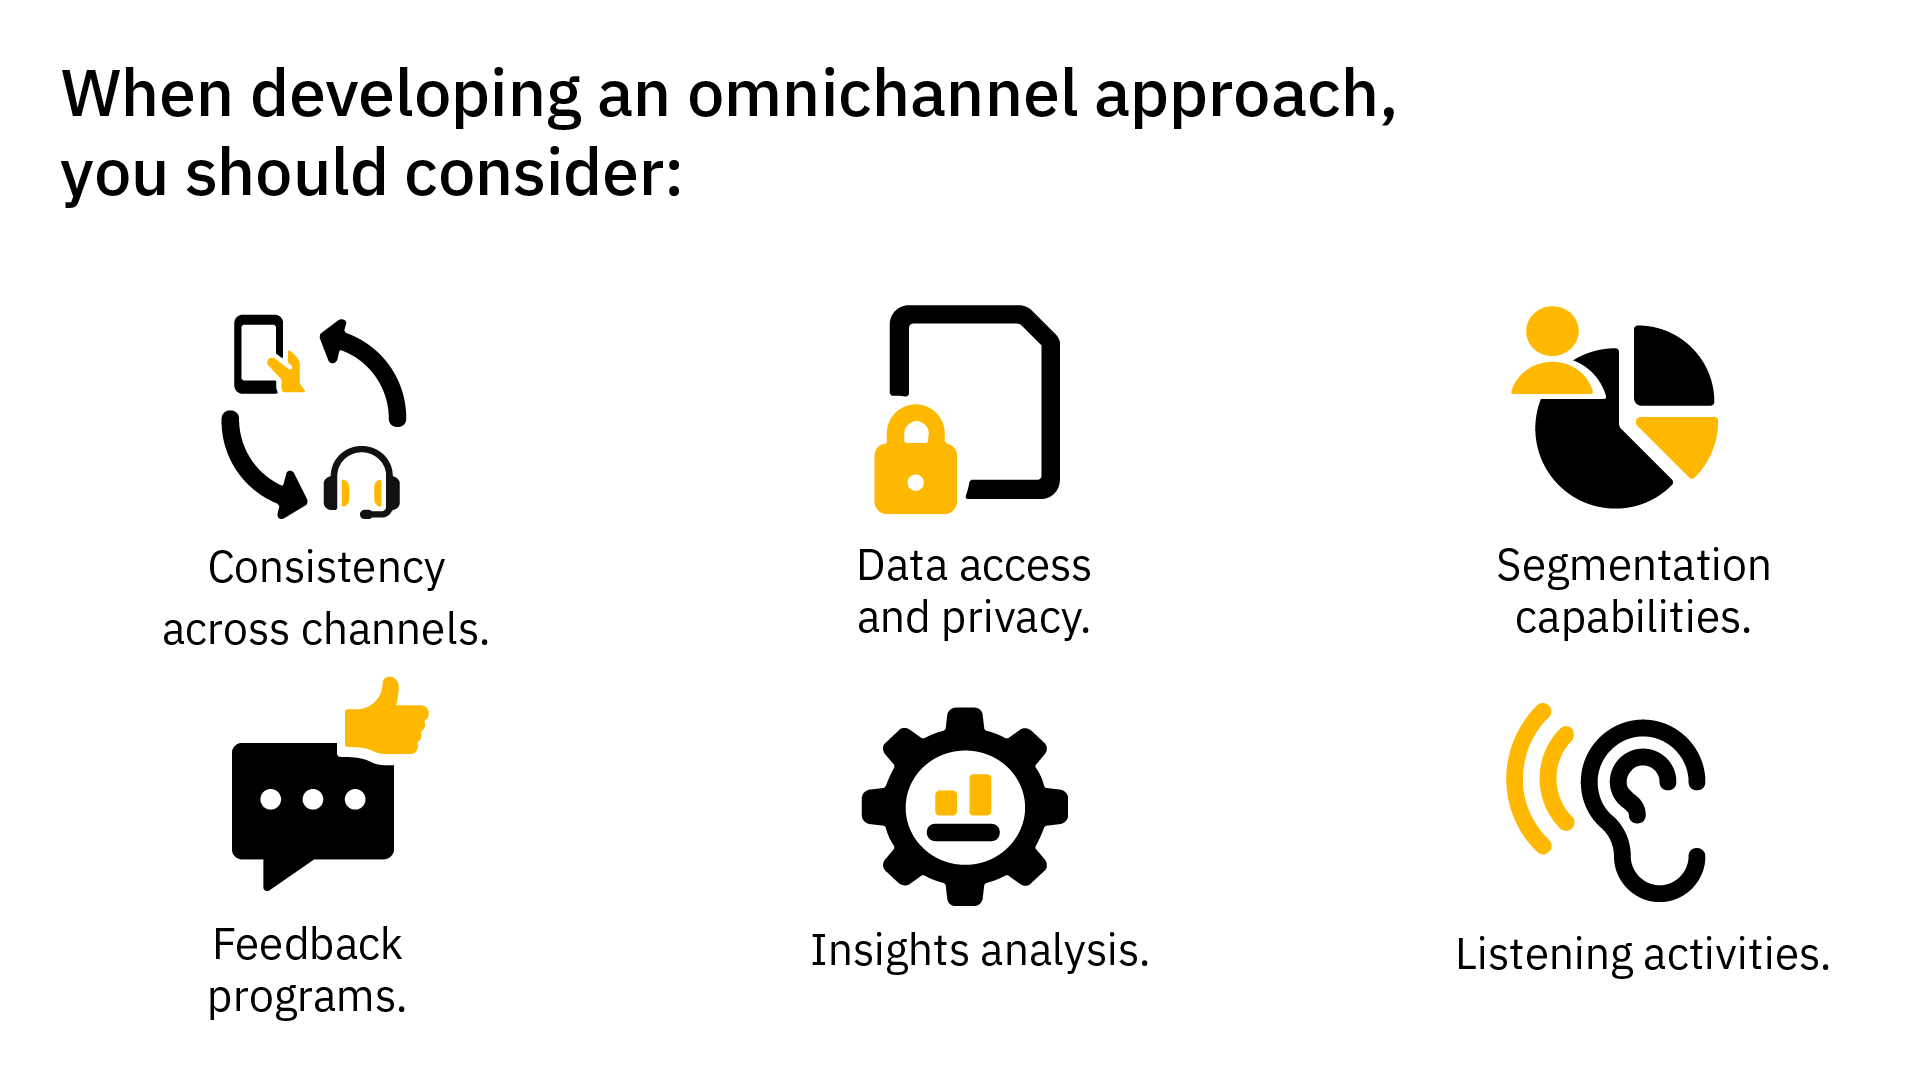 What to consider when developing omnichannel approach